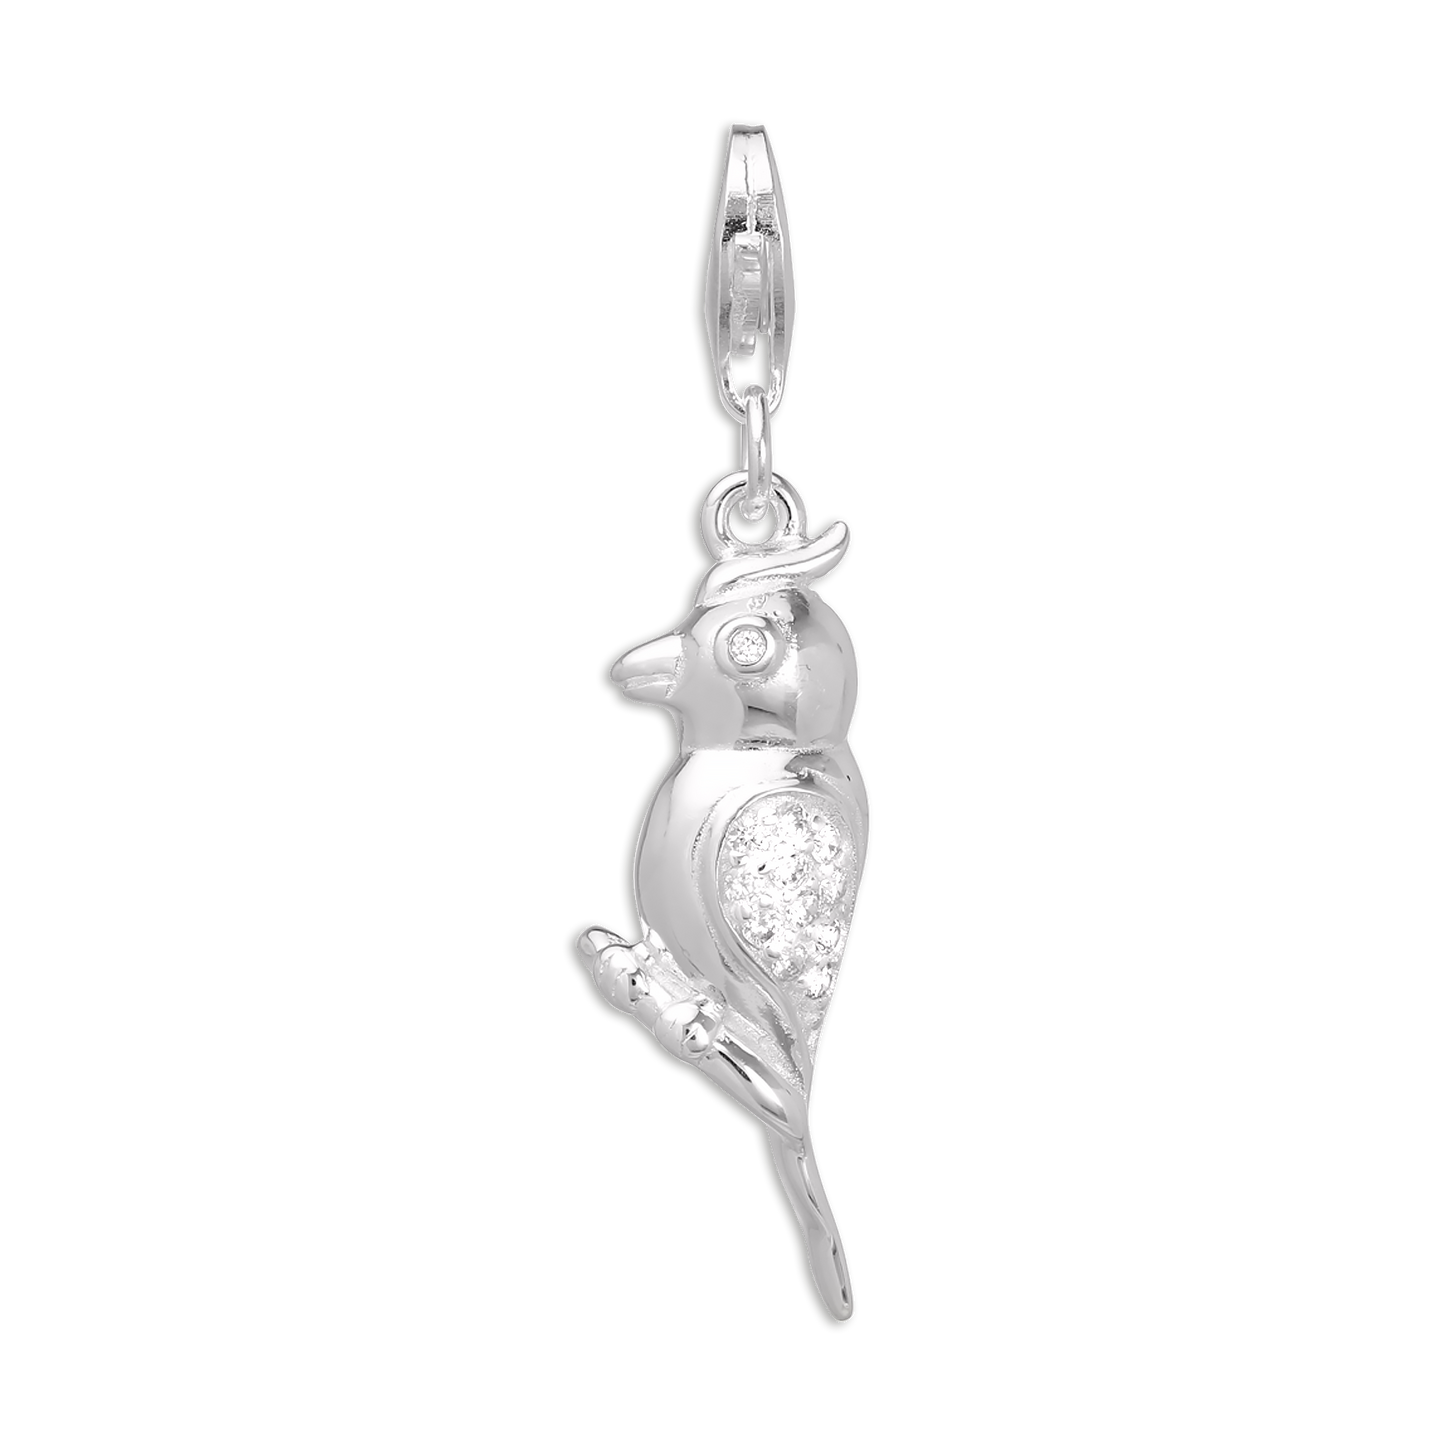 Sterling Silver & CZ Crystal Parrot Clip on Charm